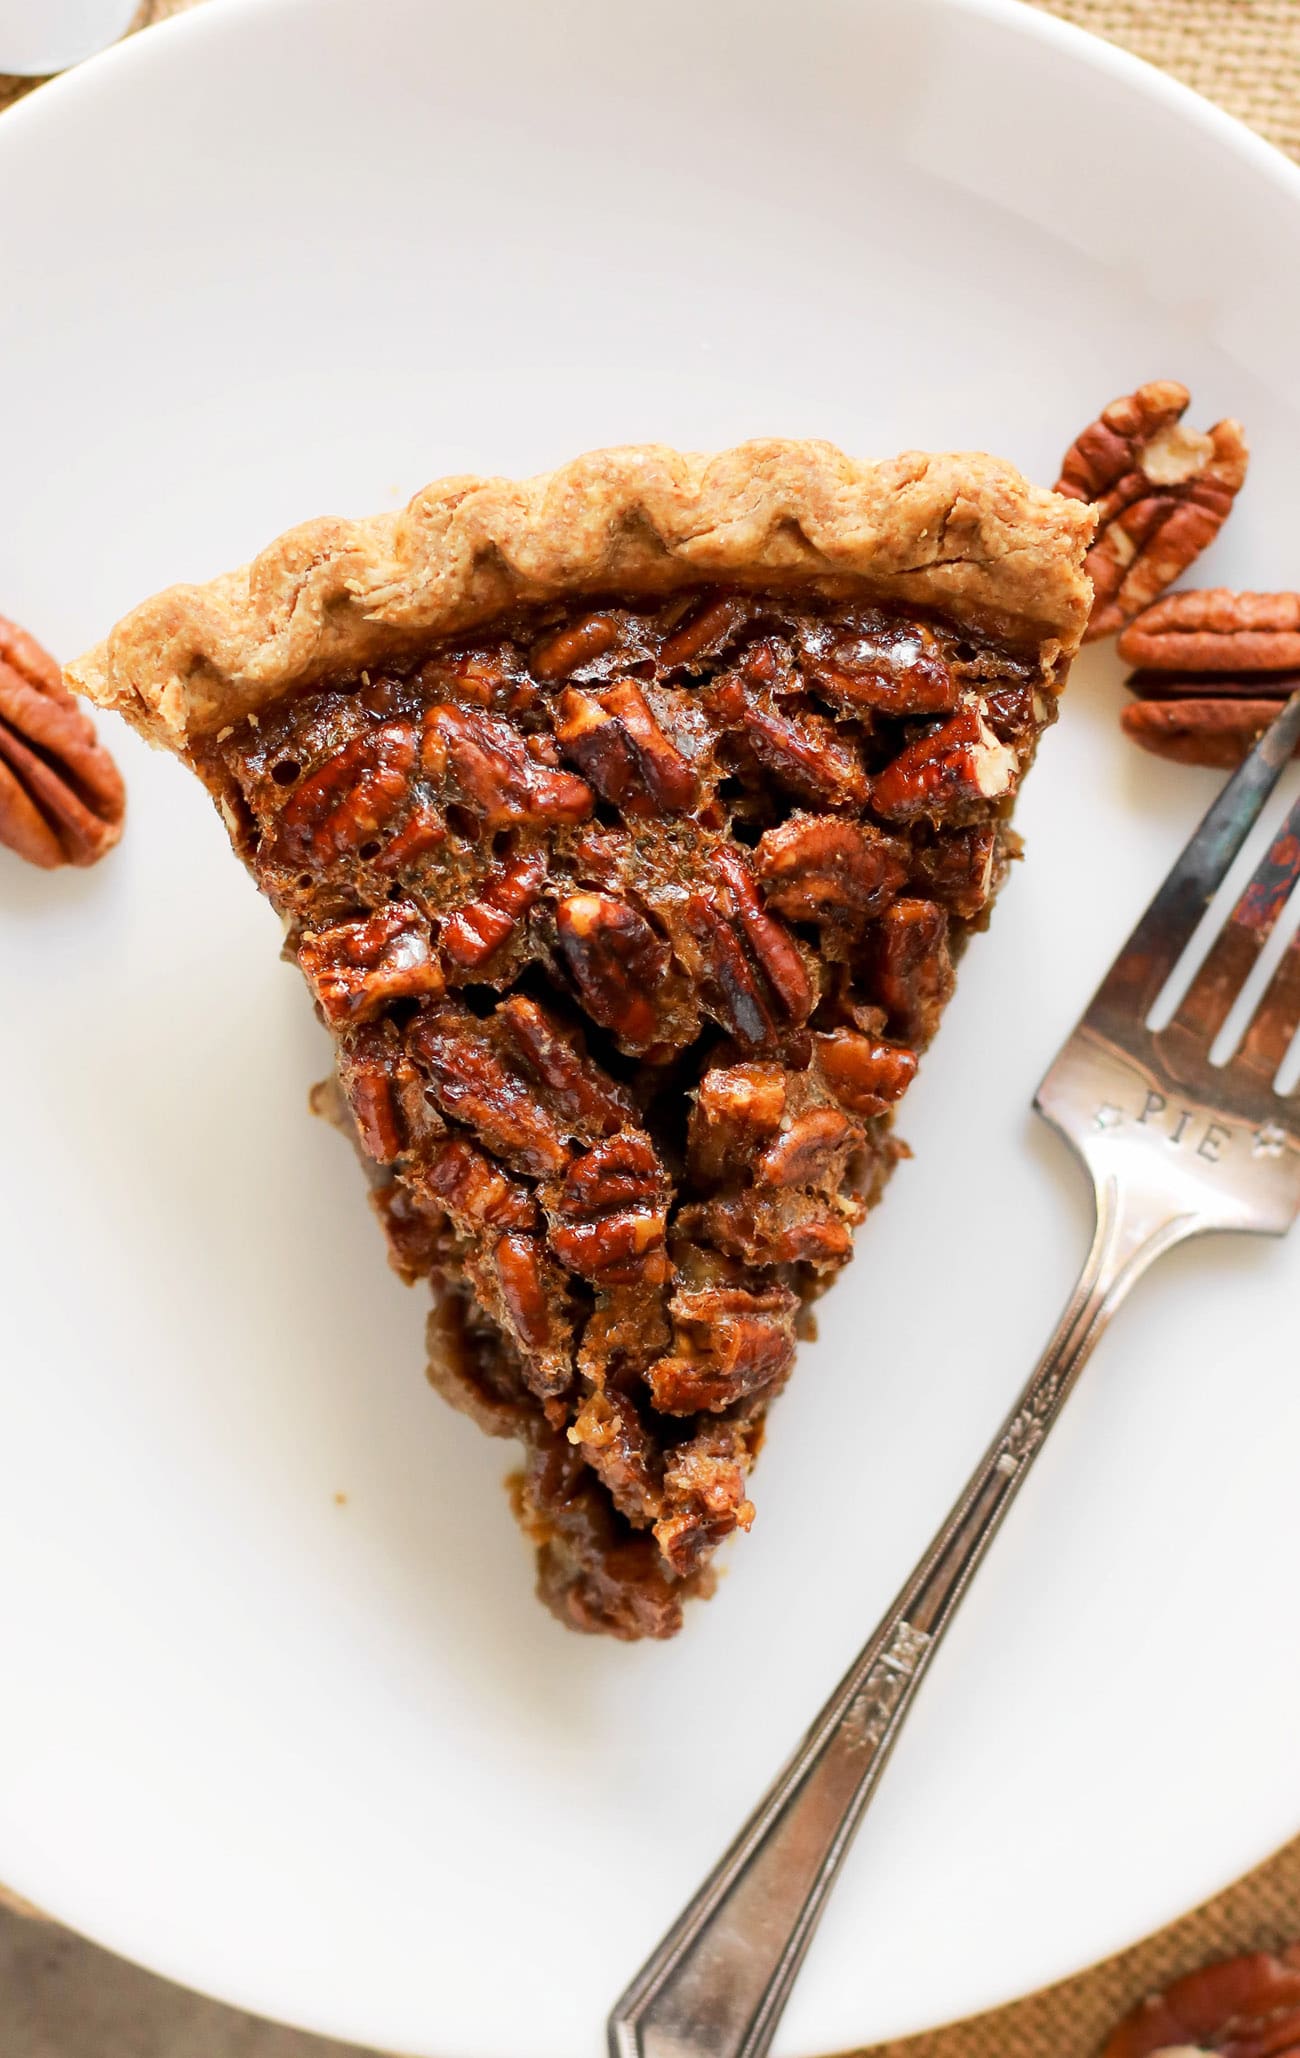 This Healthy Pecan Pie is so rich and decadent, every bite is pure joy -- you'd never know it's made without the corn syrup, white sugar, butter, and heavy cream! This freezer friendly Pecan Pie is an all natural, good-for-you dessert that is perfect for Thanksgiving, Christmas, birthdays, or any day for that matter!